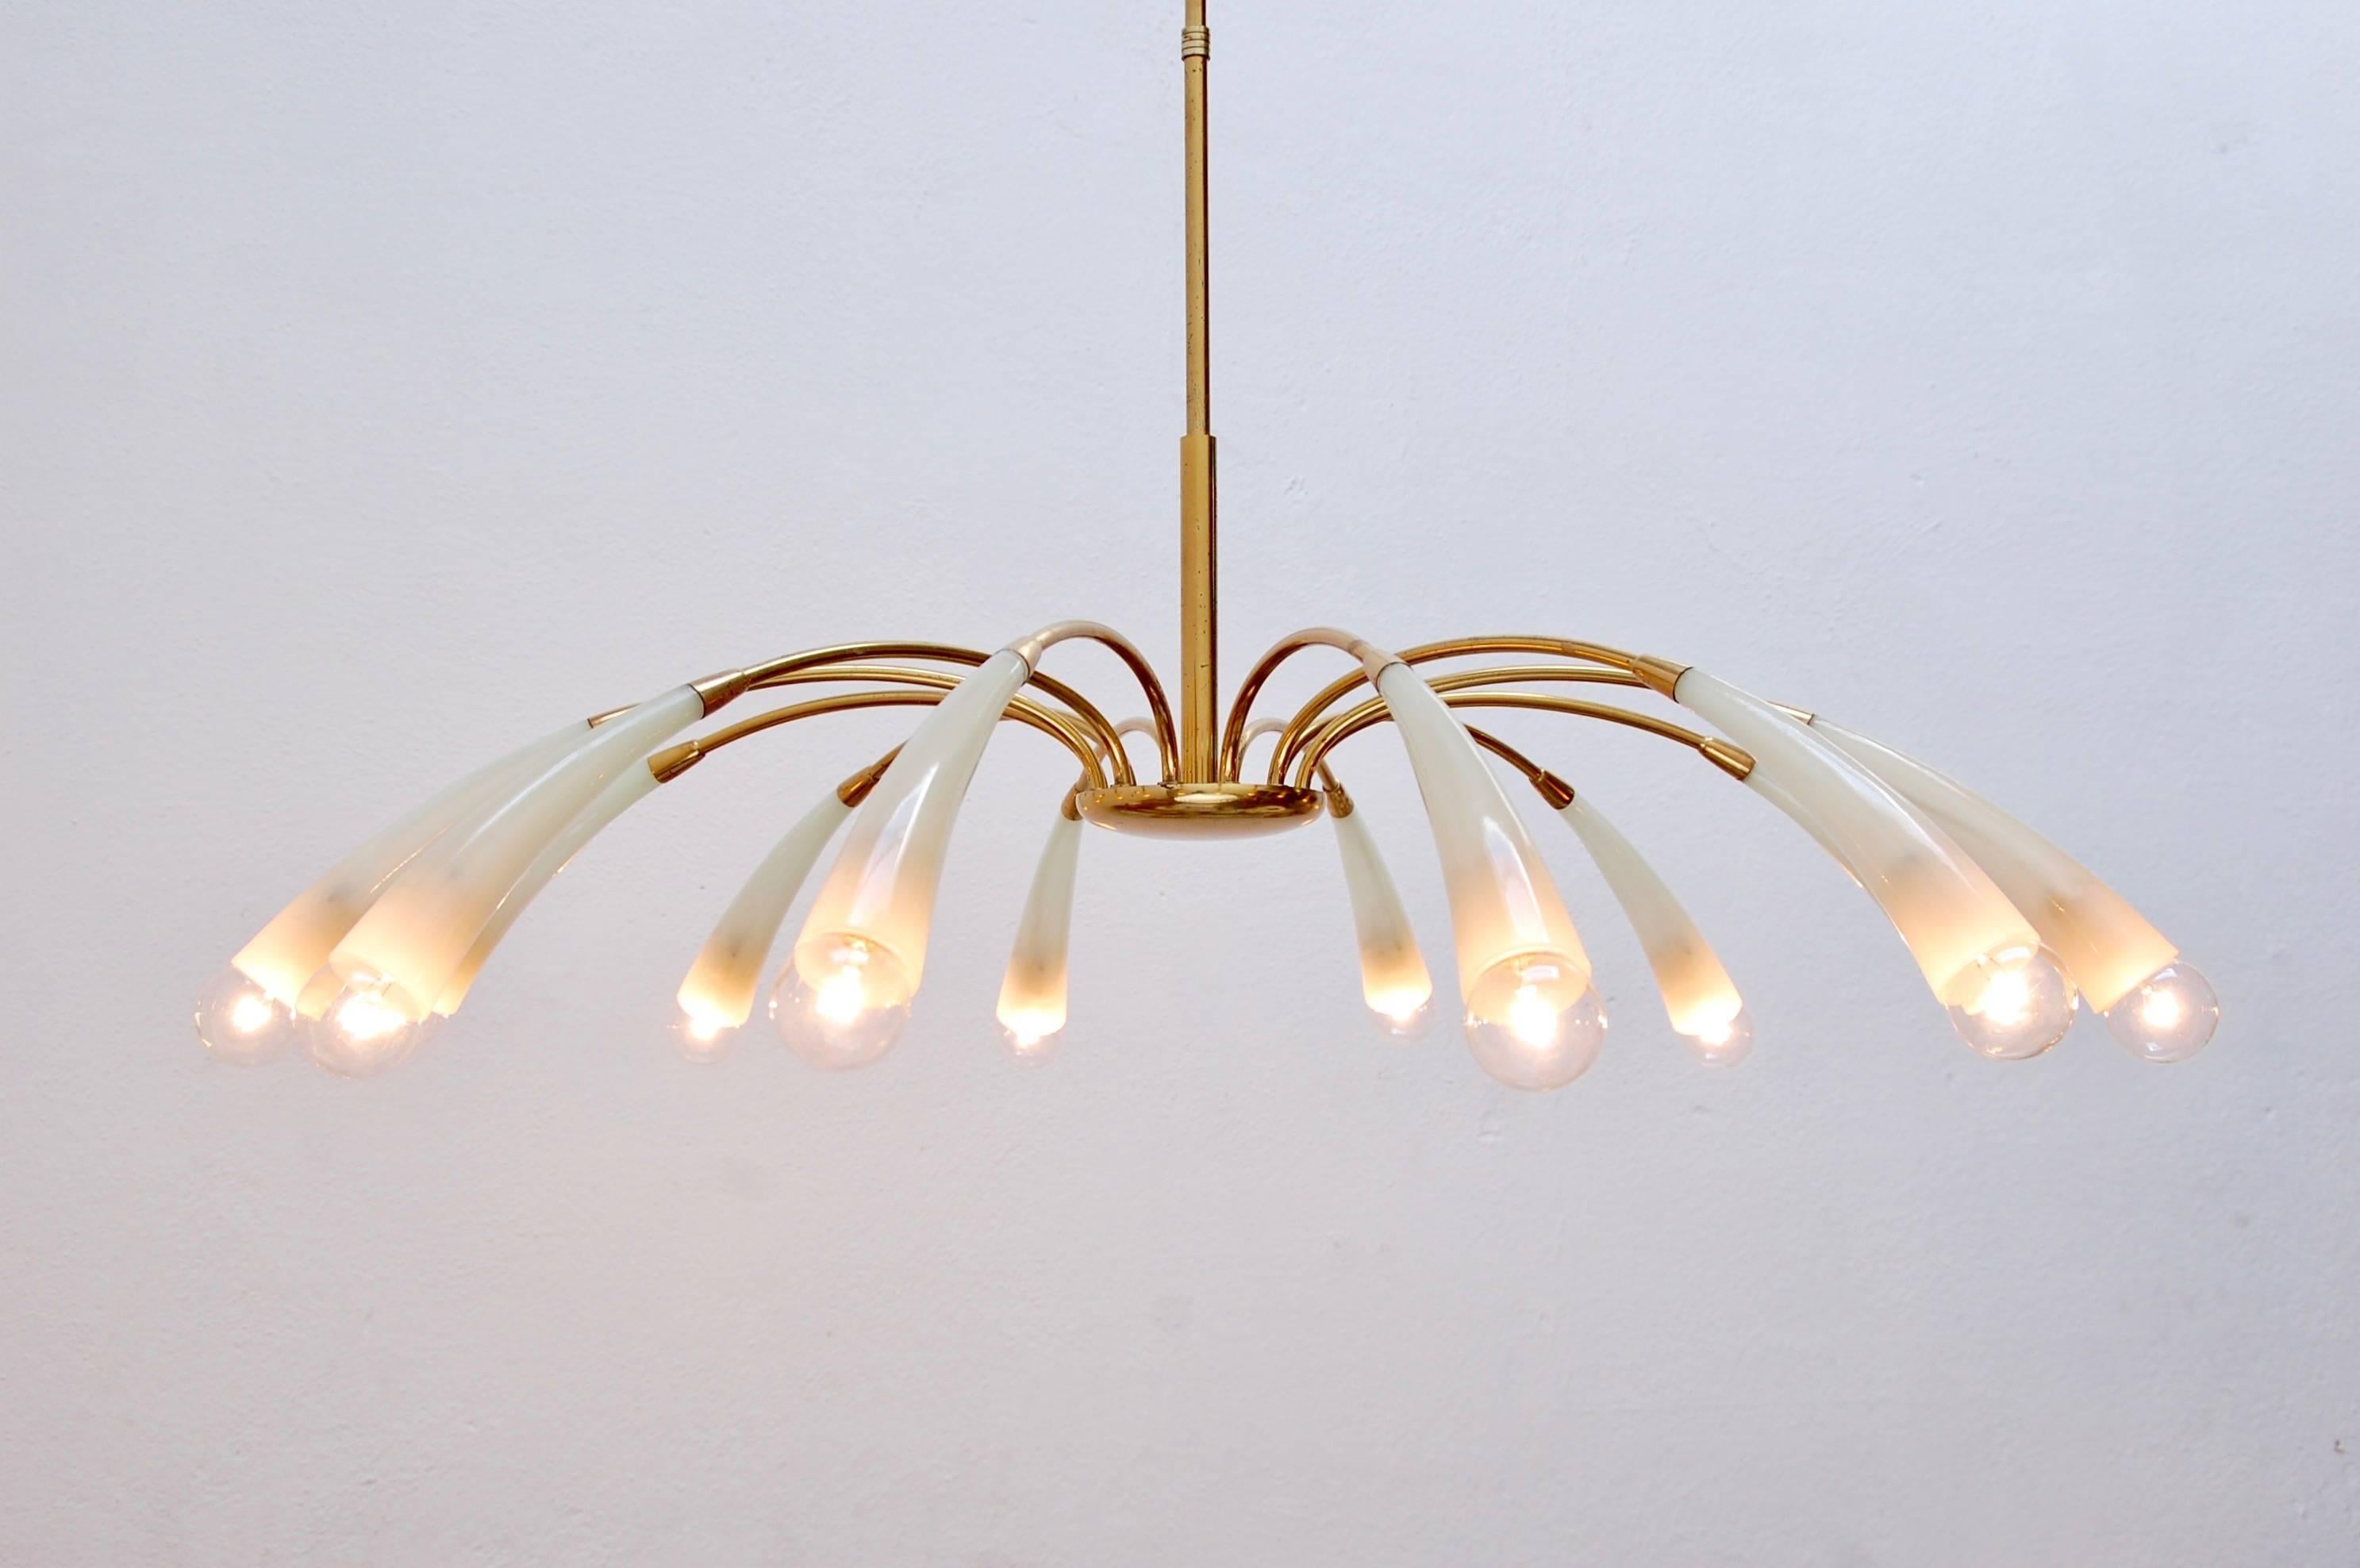 Stunning twelve-light large fluted glass chandelier from 1960s, Italy. Beautifully naturally aged brass and elegant fluted arms. 
Measures: OAD: 30”,
Diameter: 40”,
Chandelier height: 9”.
 